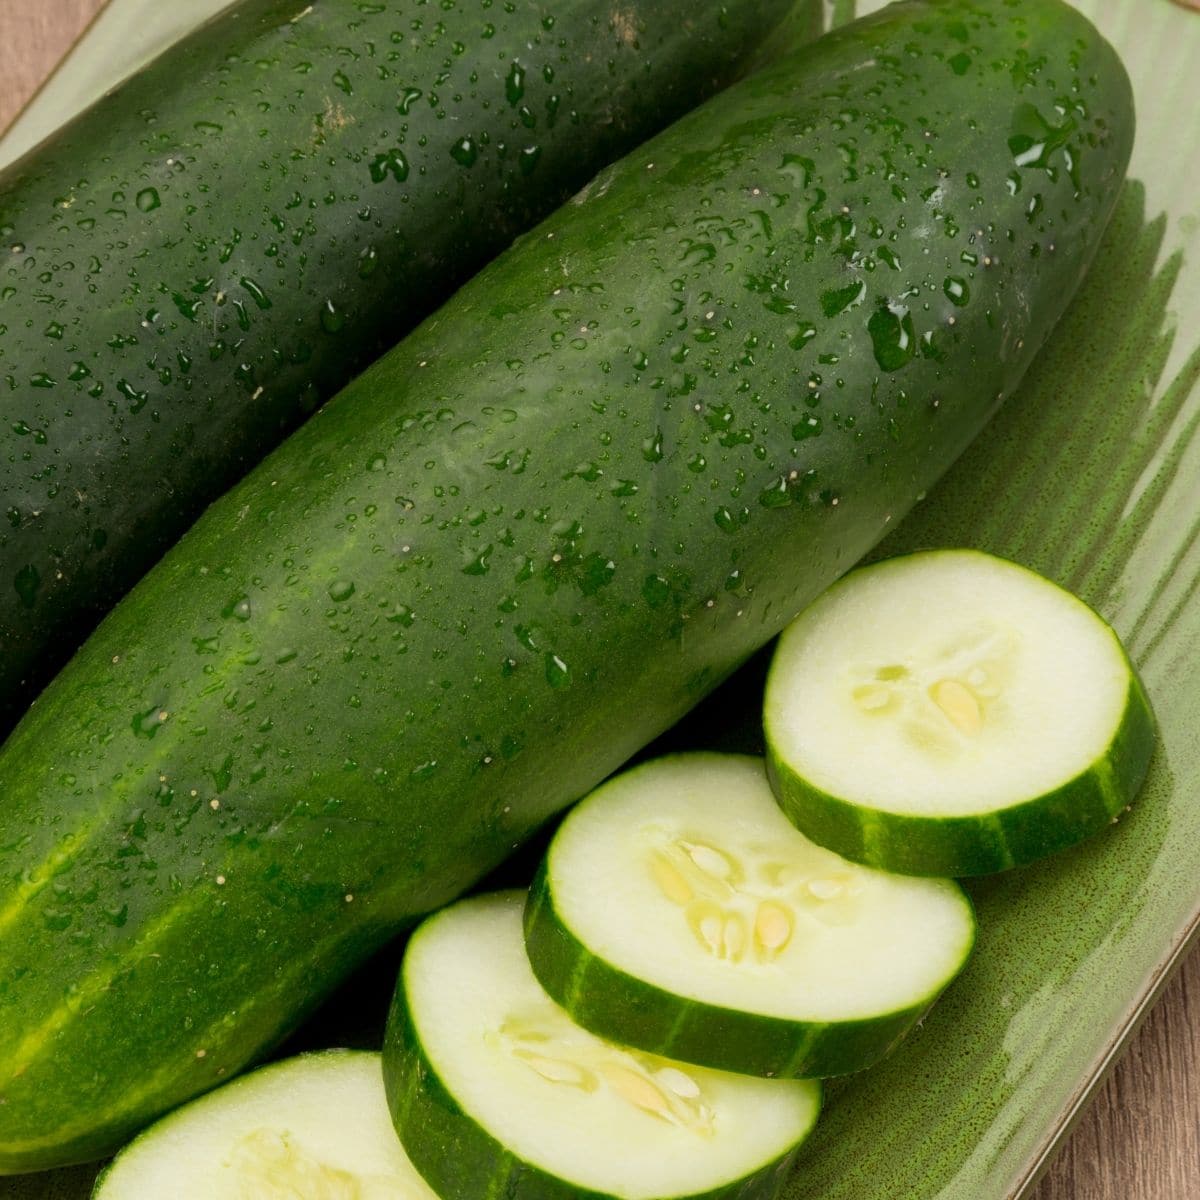 Square image of cucumbers on a cutting board.